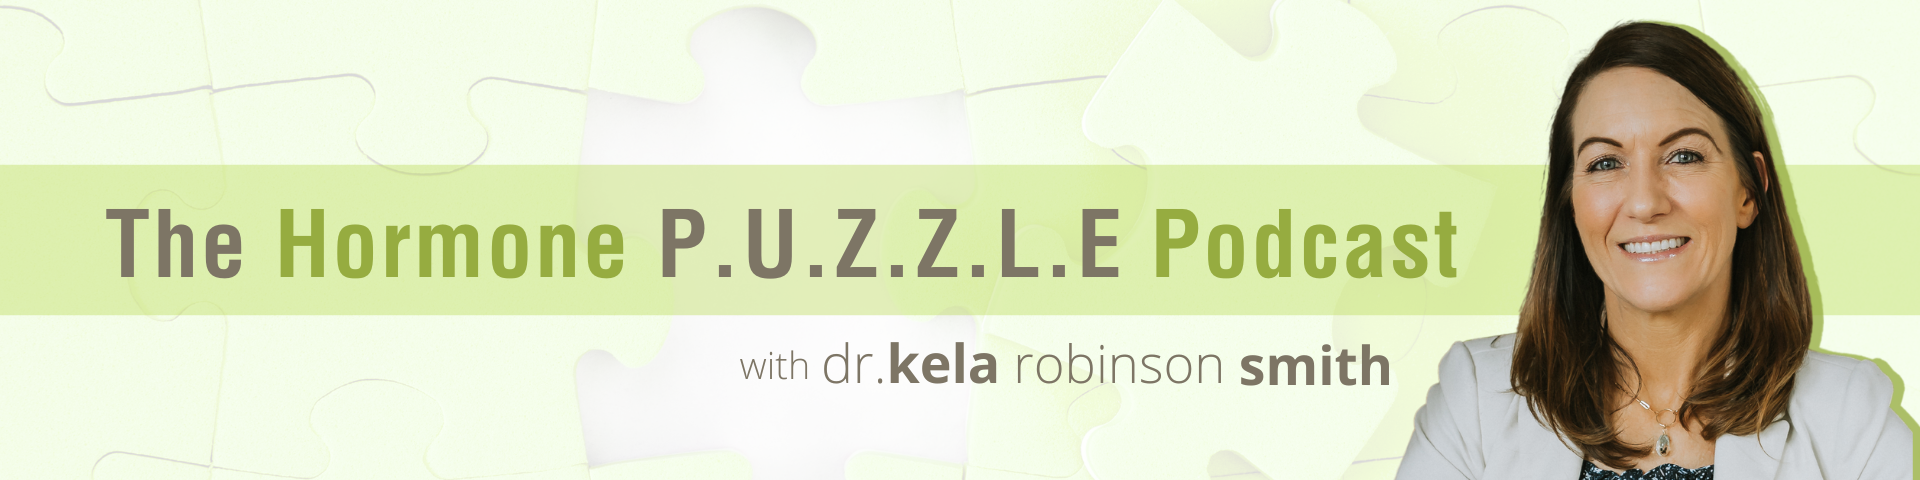 Podcast Banner - The Hormone Puzzle Podcast